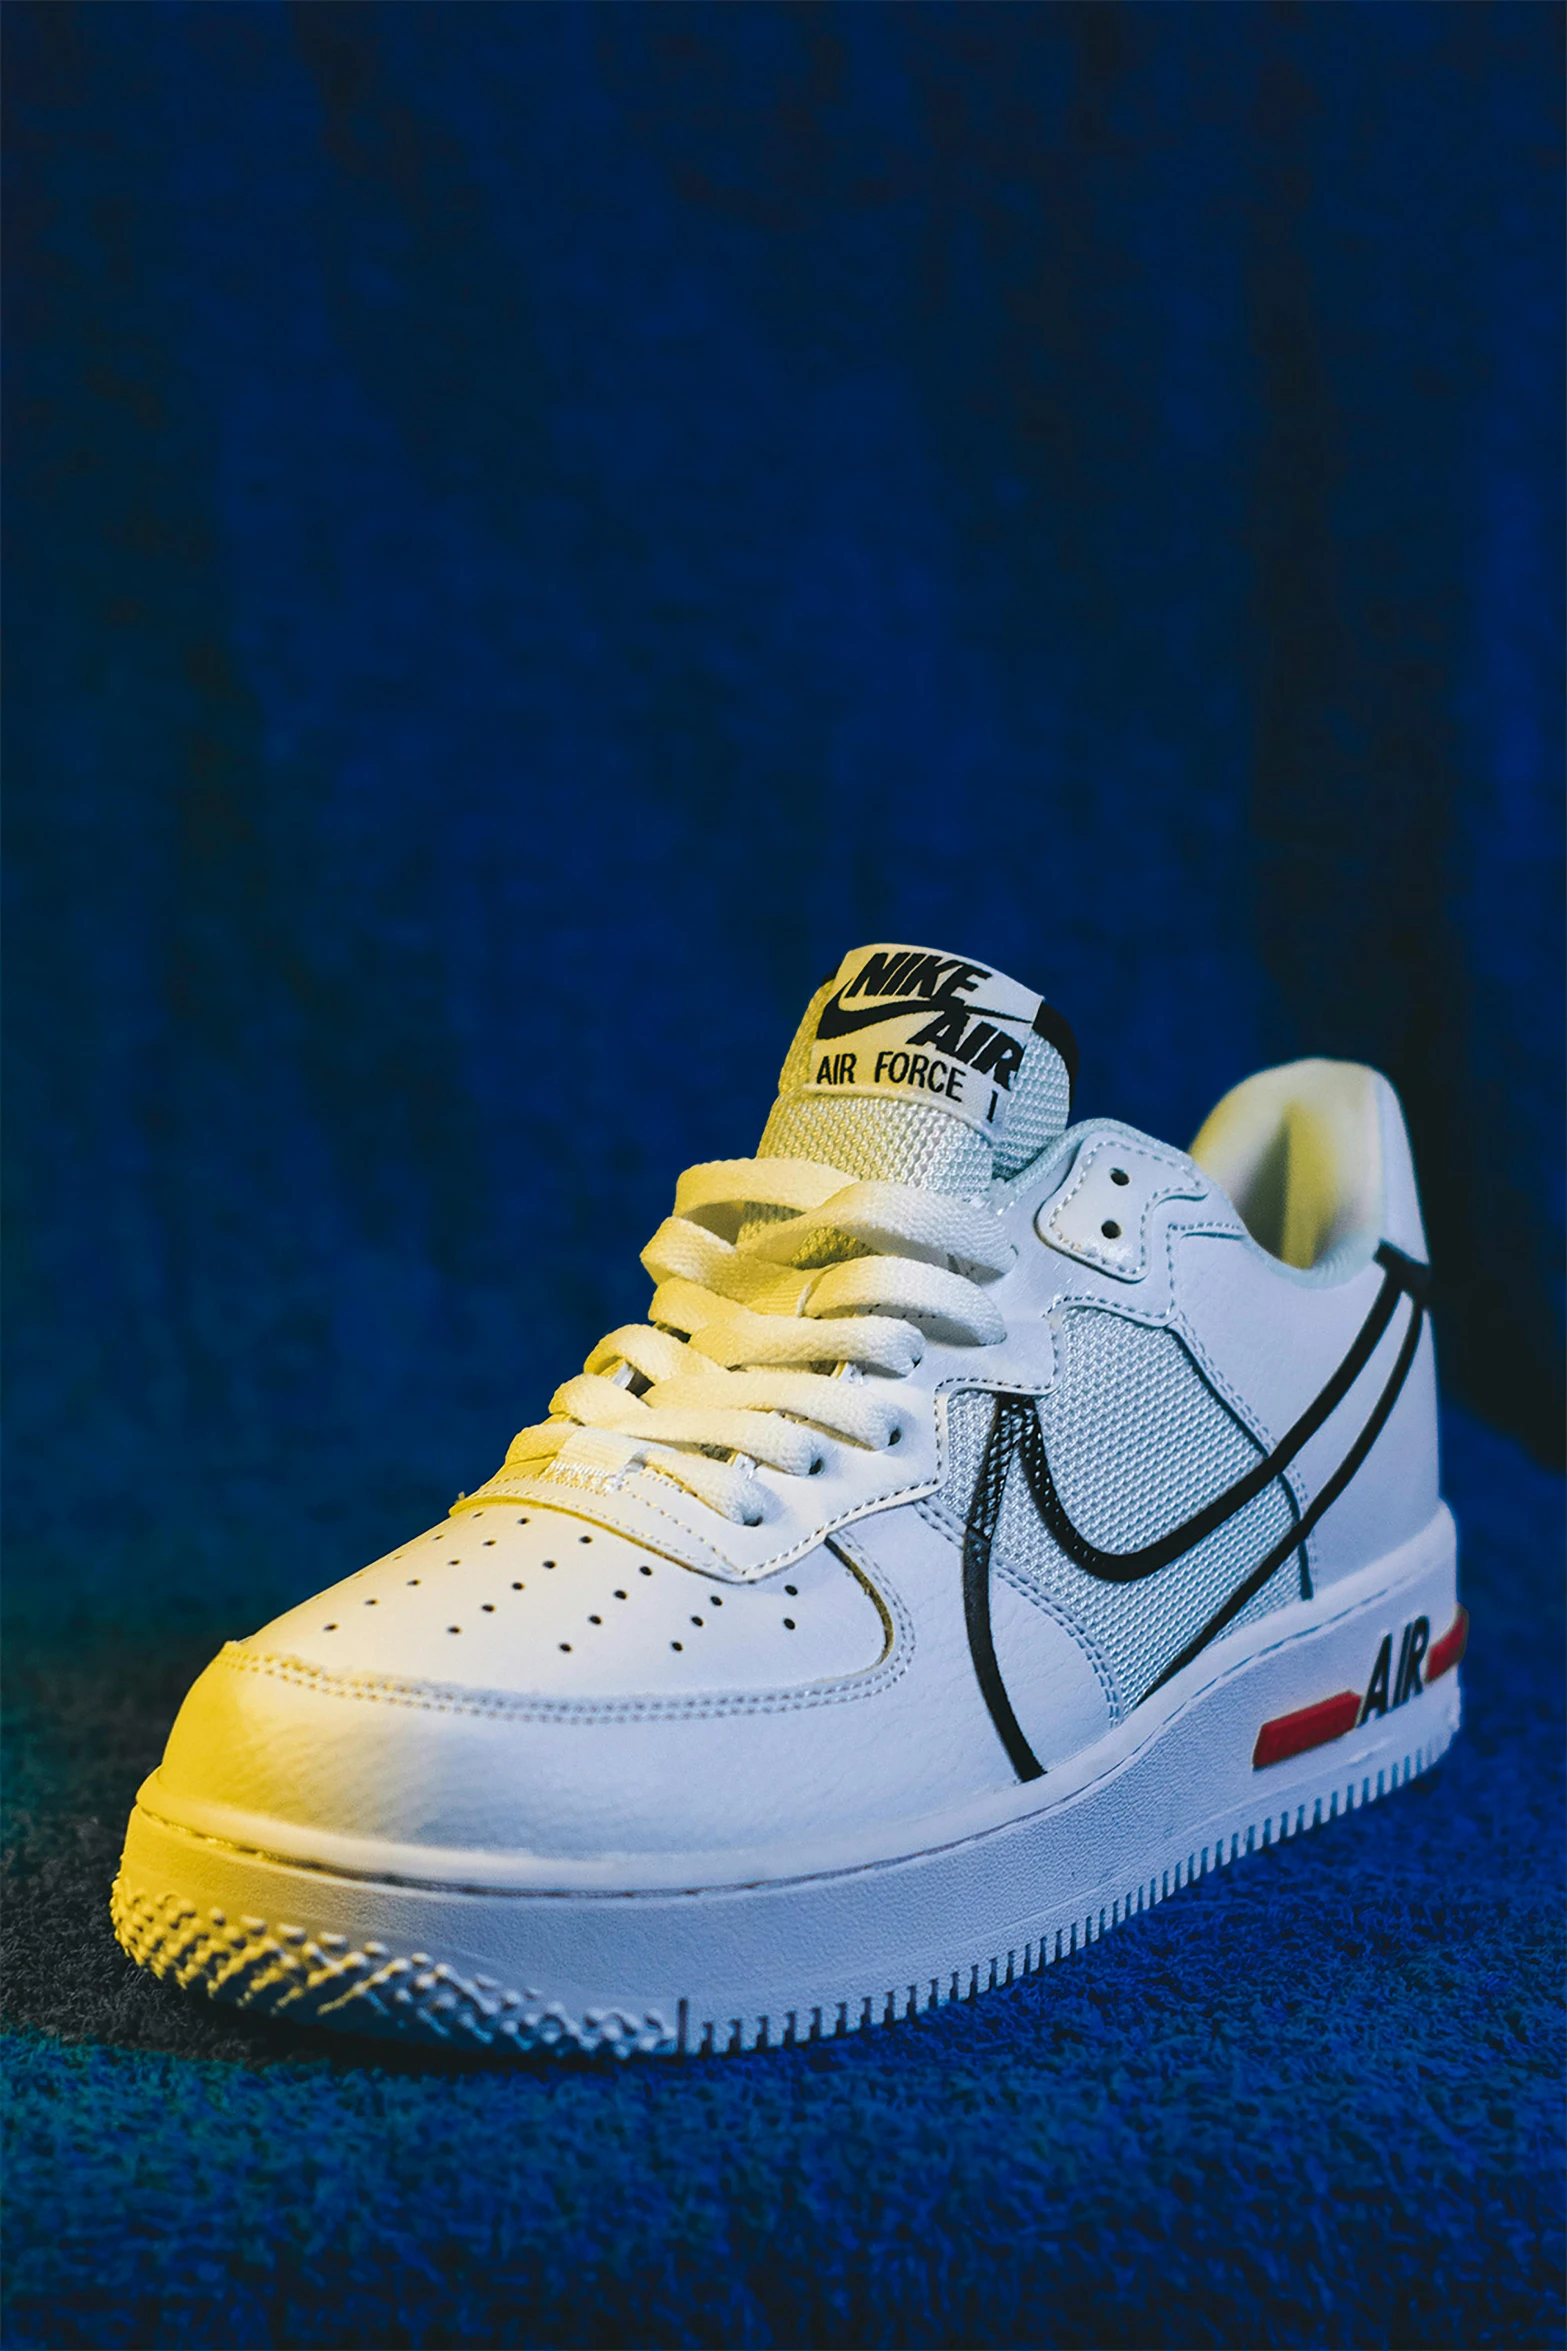 an image of a pair of white nike air force sneakers